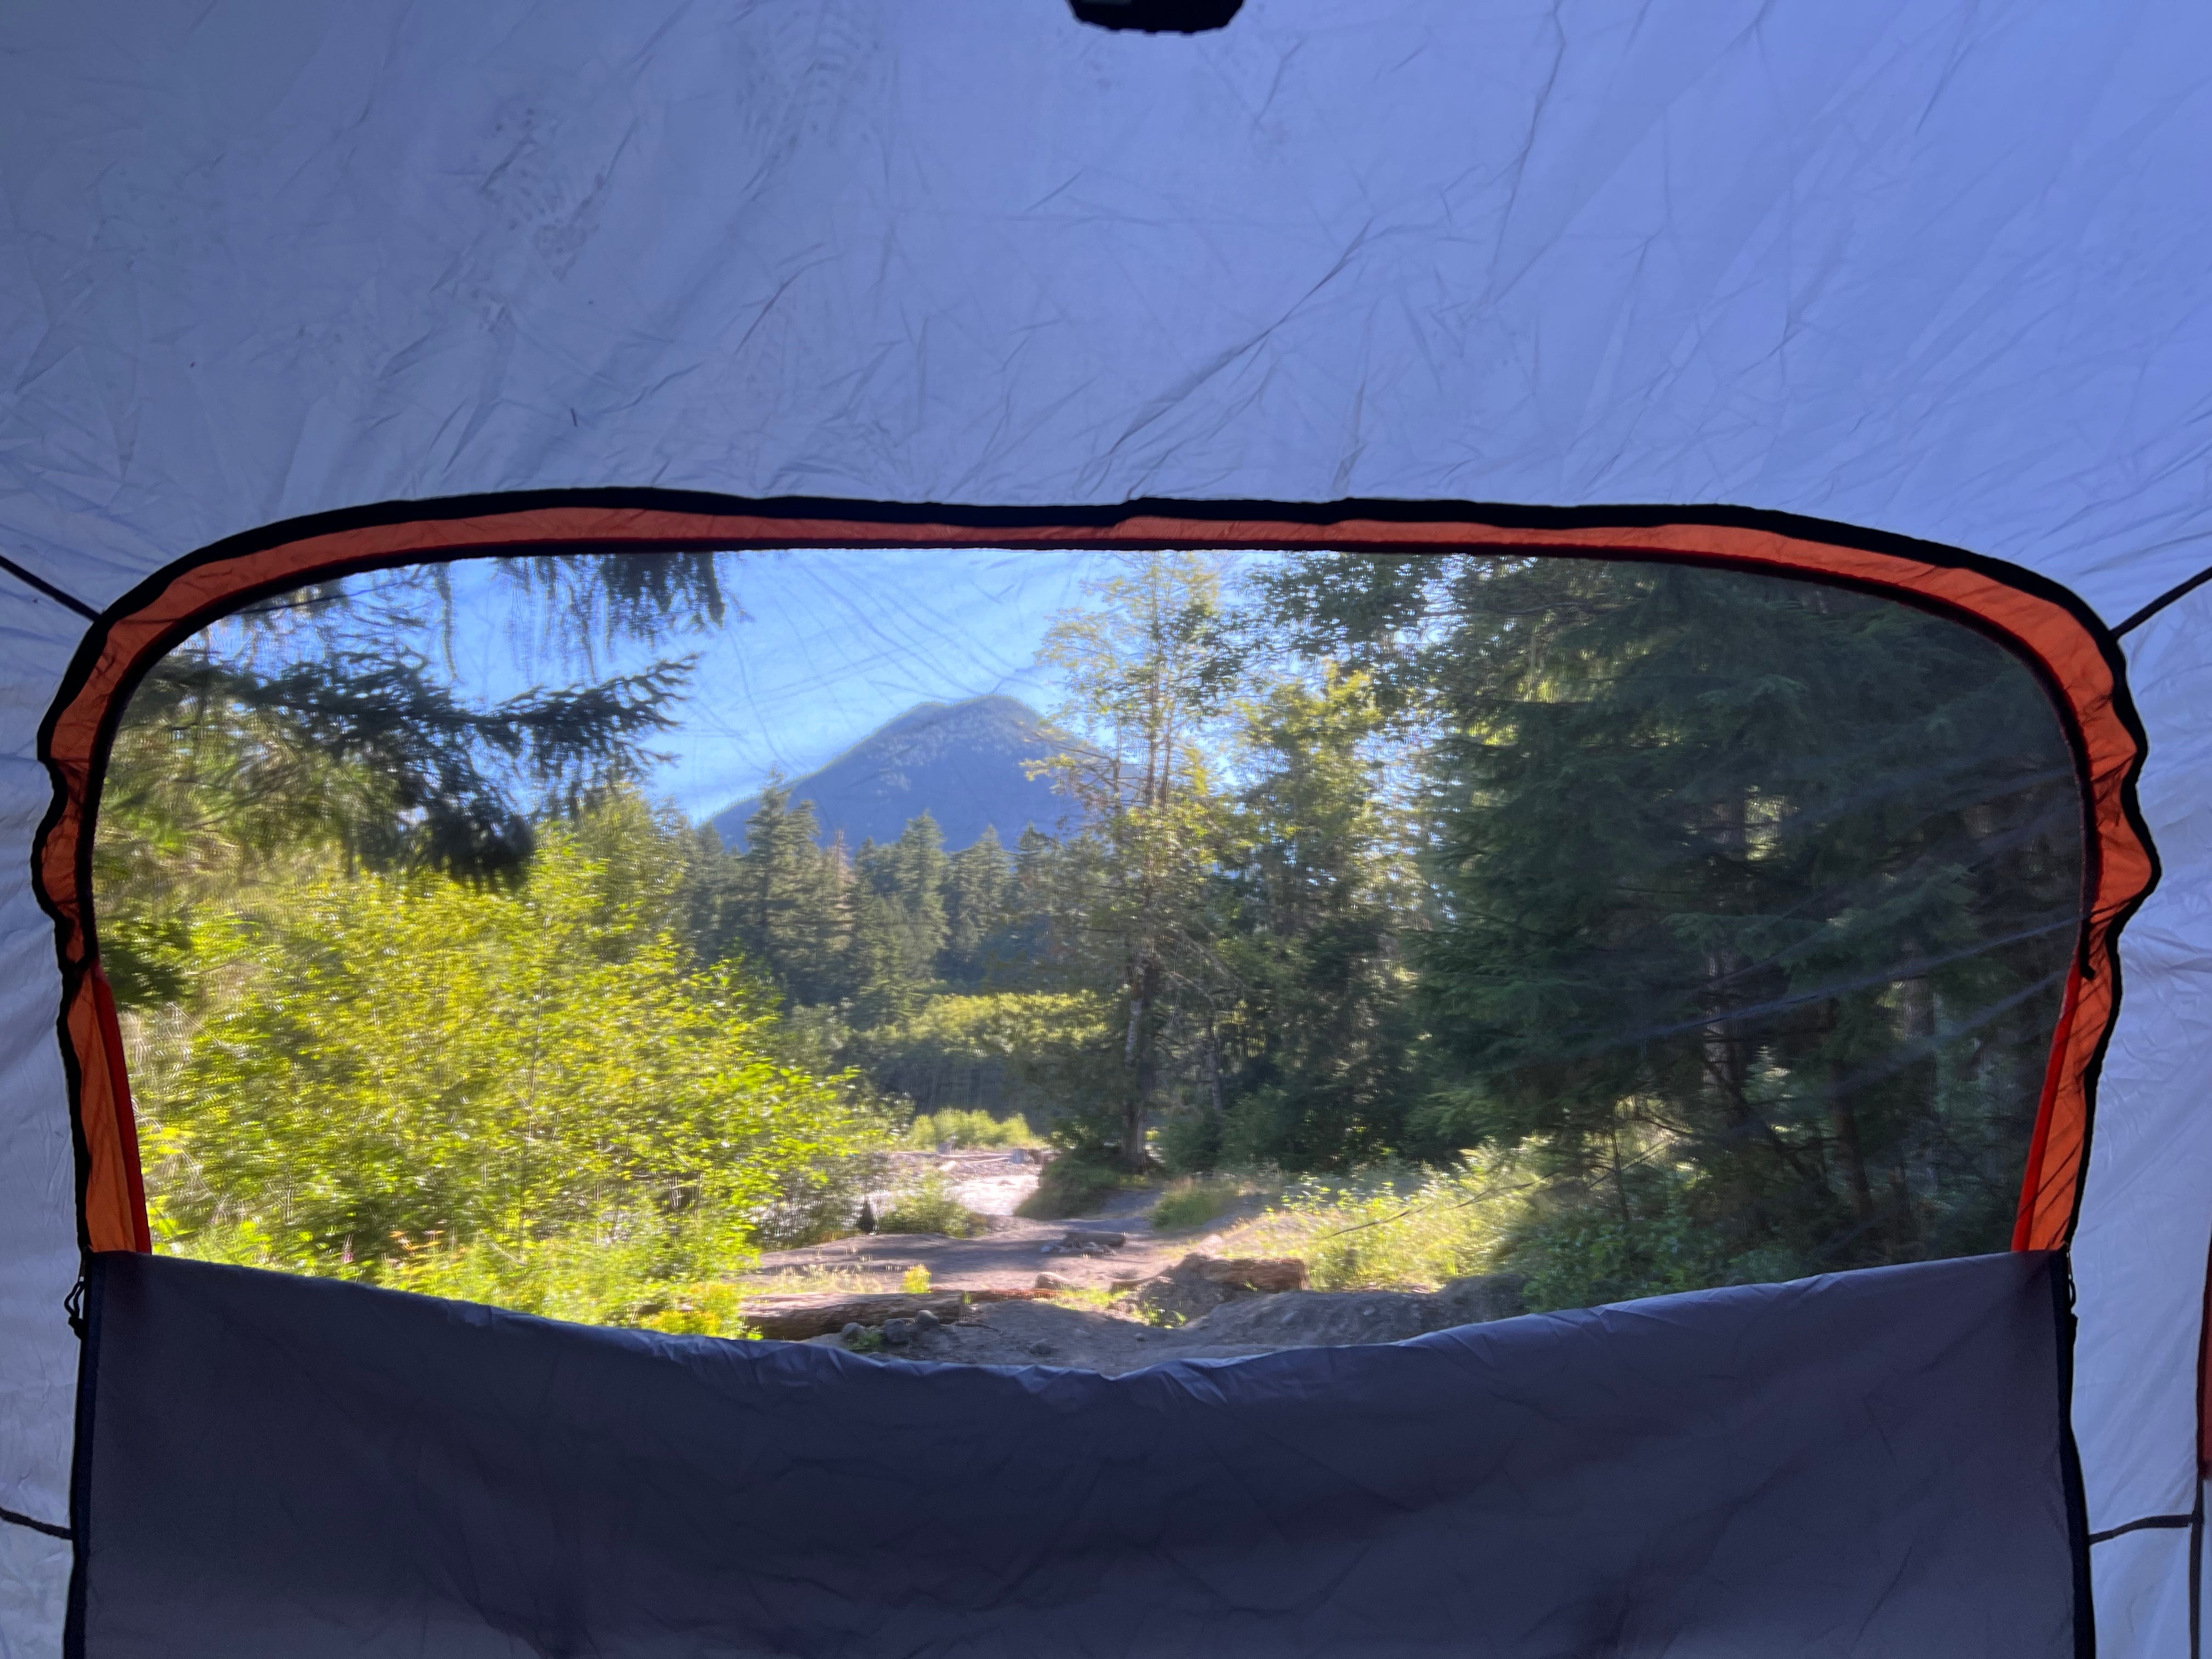 Camper submitted image from NF-52 Dispersed Camping - 1